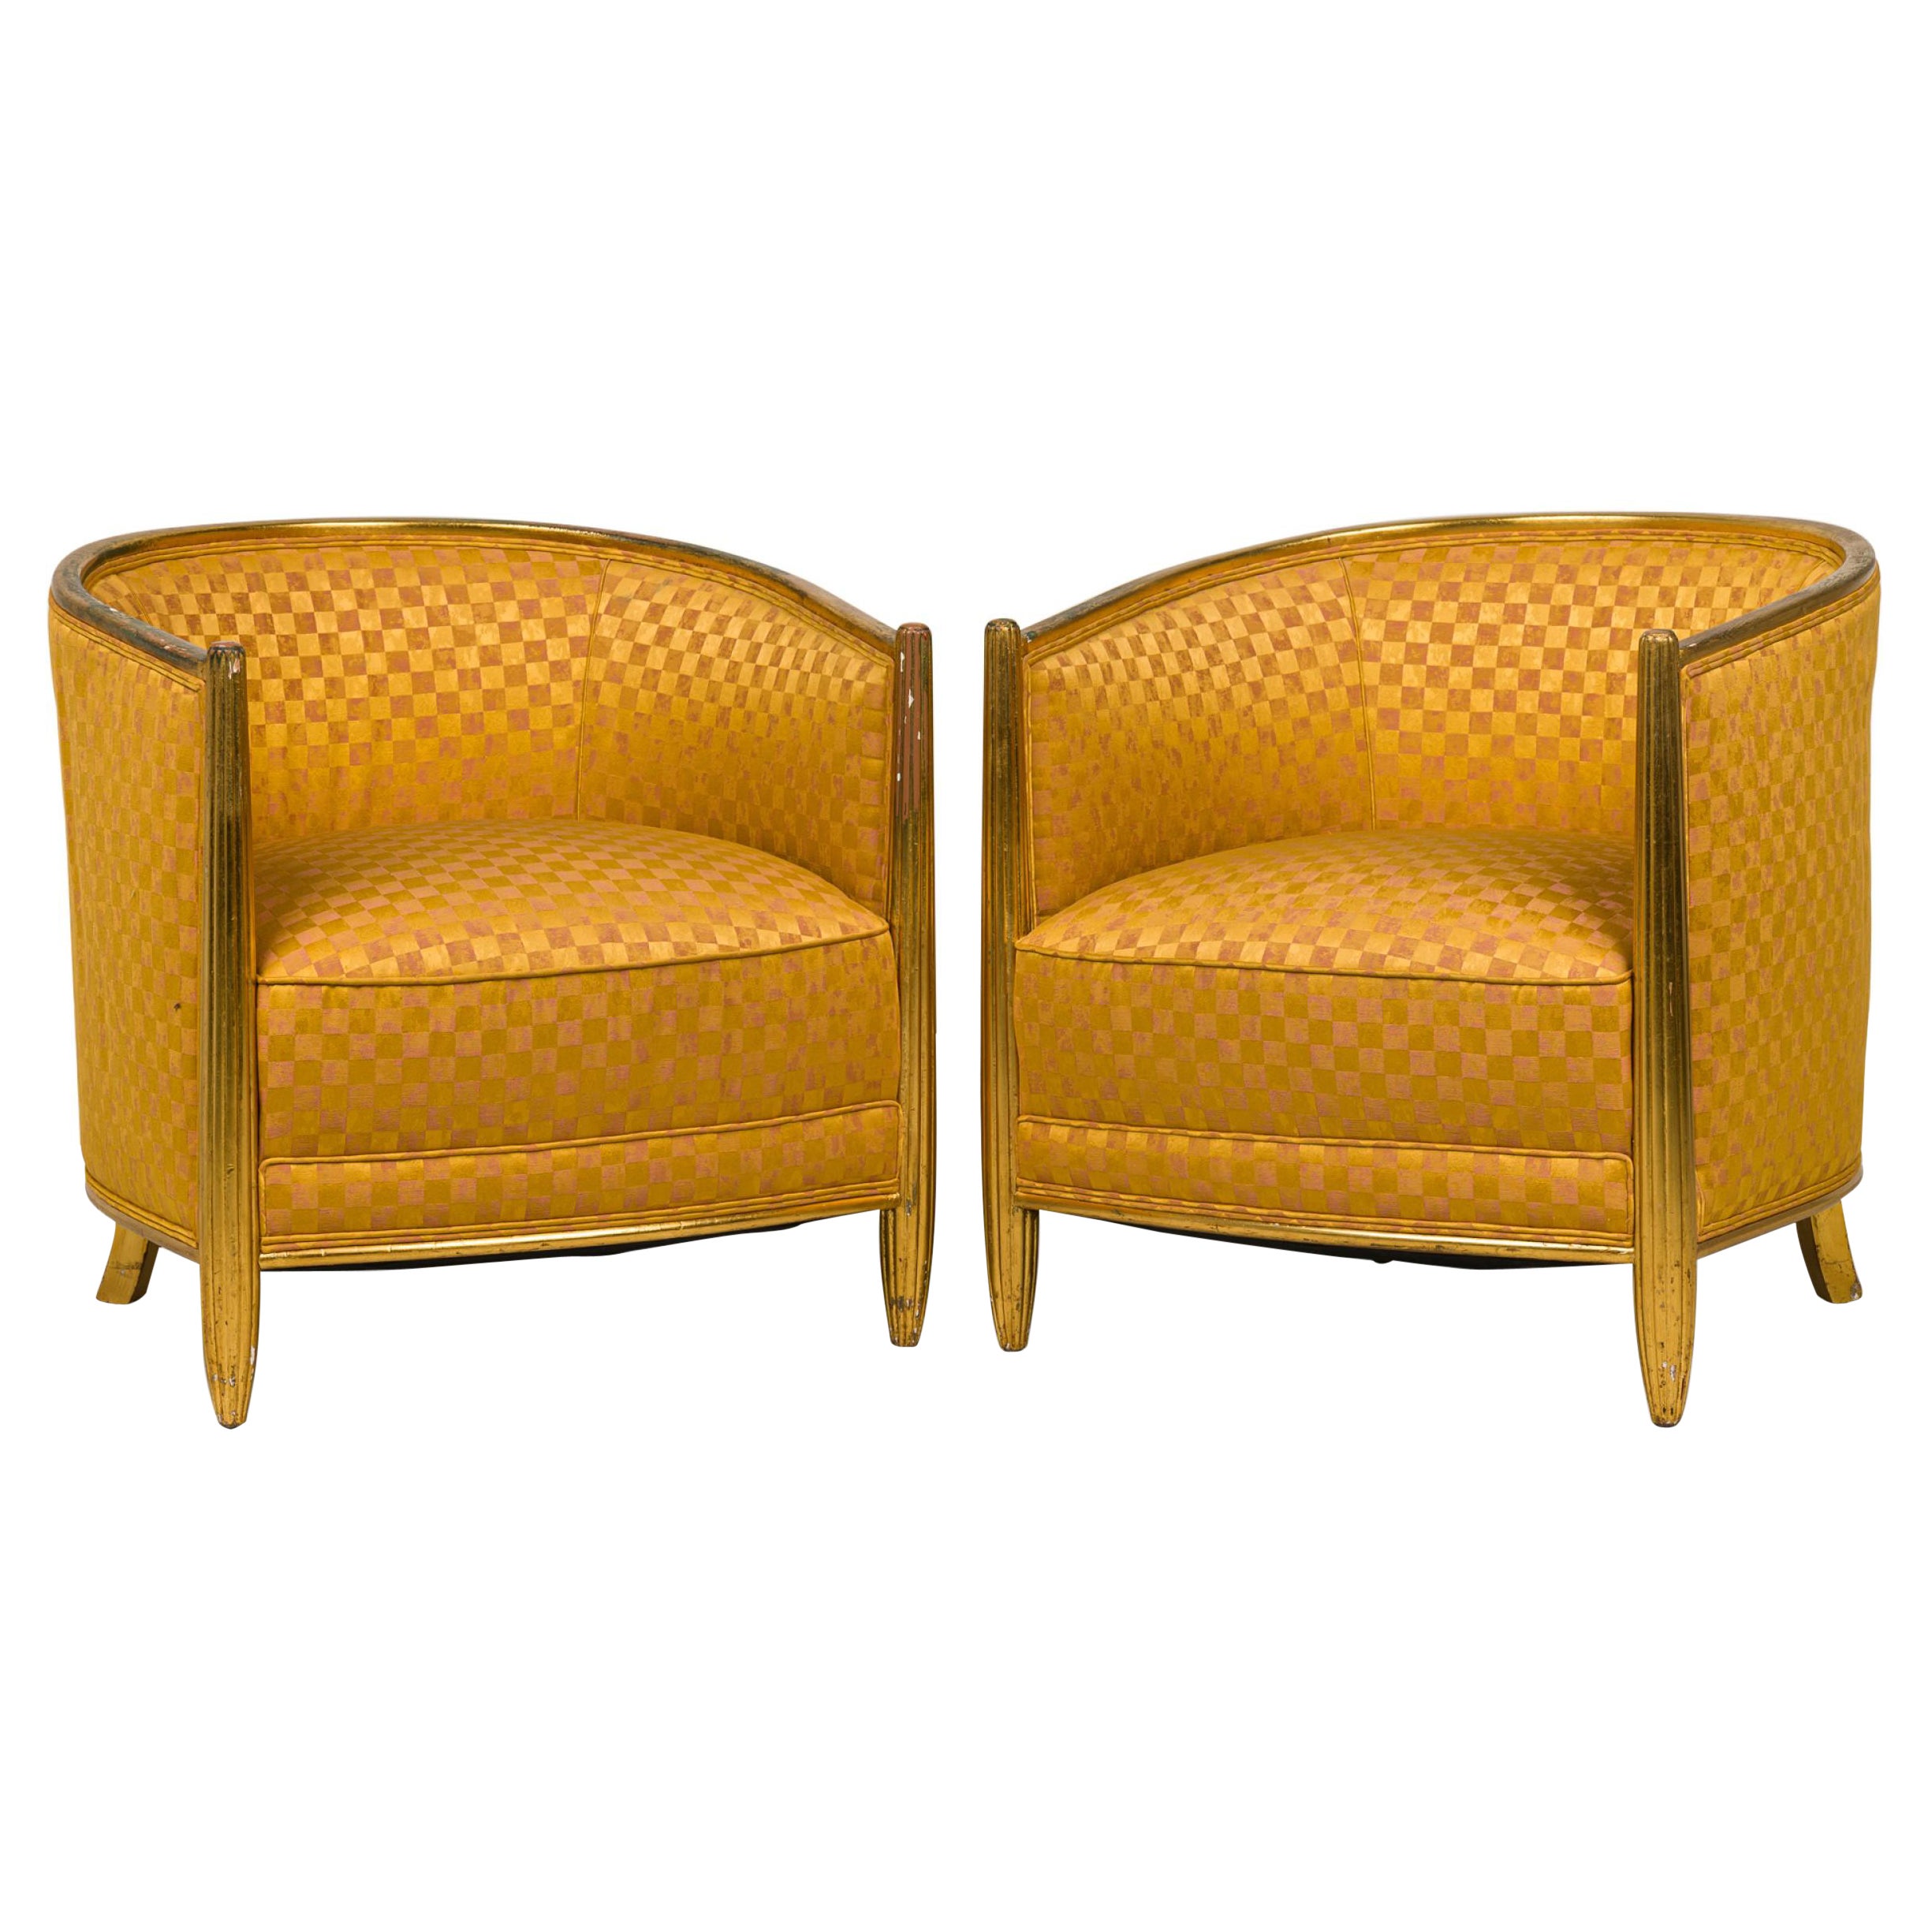 Pair of French Art Deco Gold Satin Upholstered Giltwood Armchairs